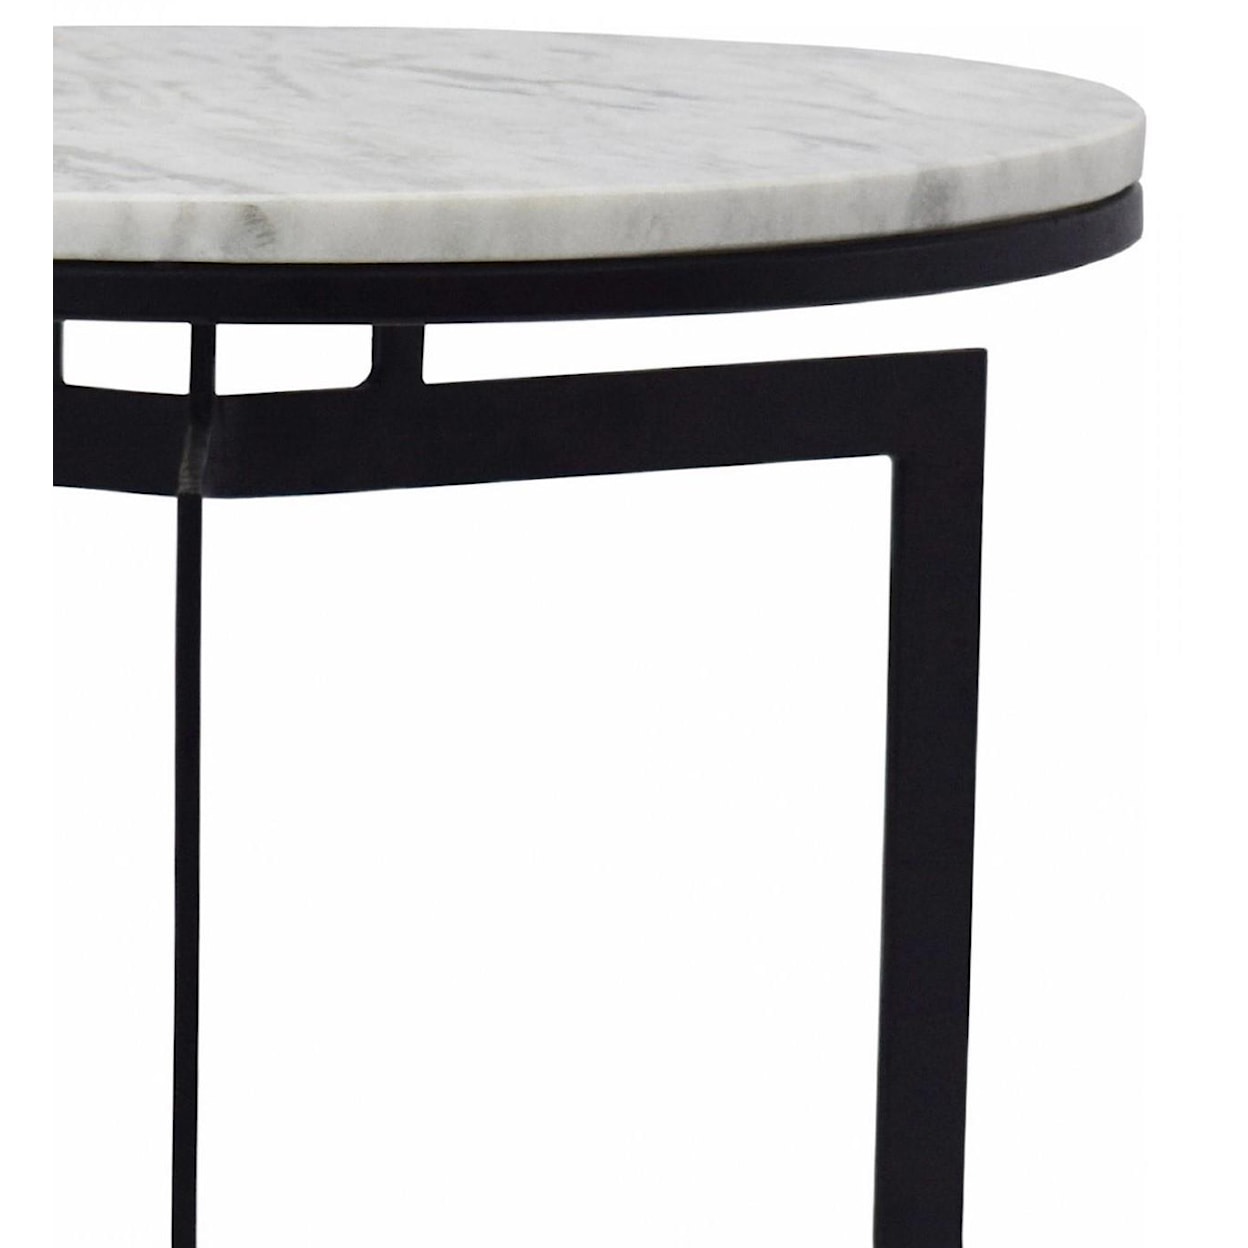 Moe's Home Collection Taryn Accent Table - Large